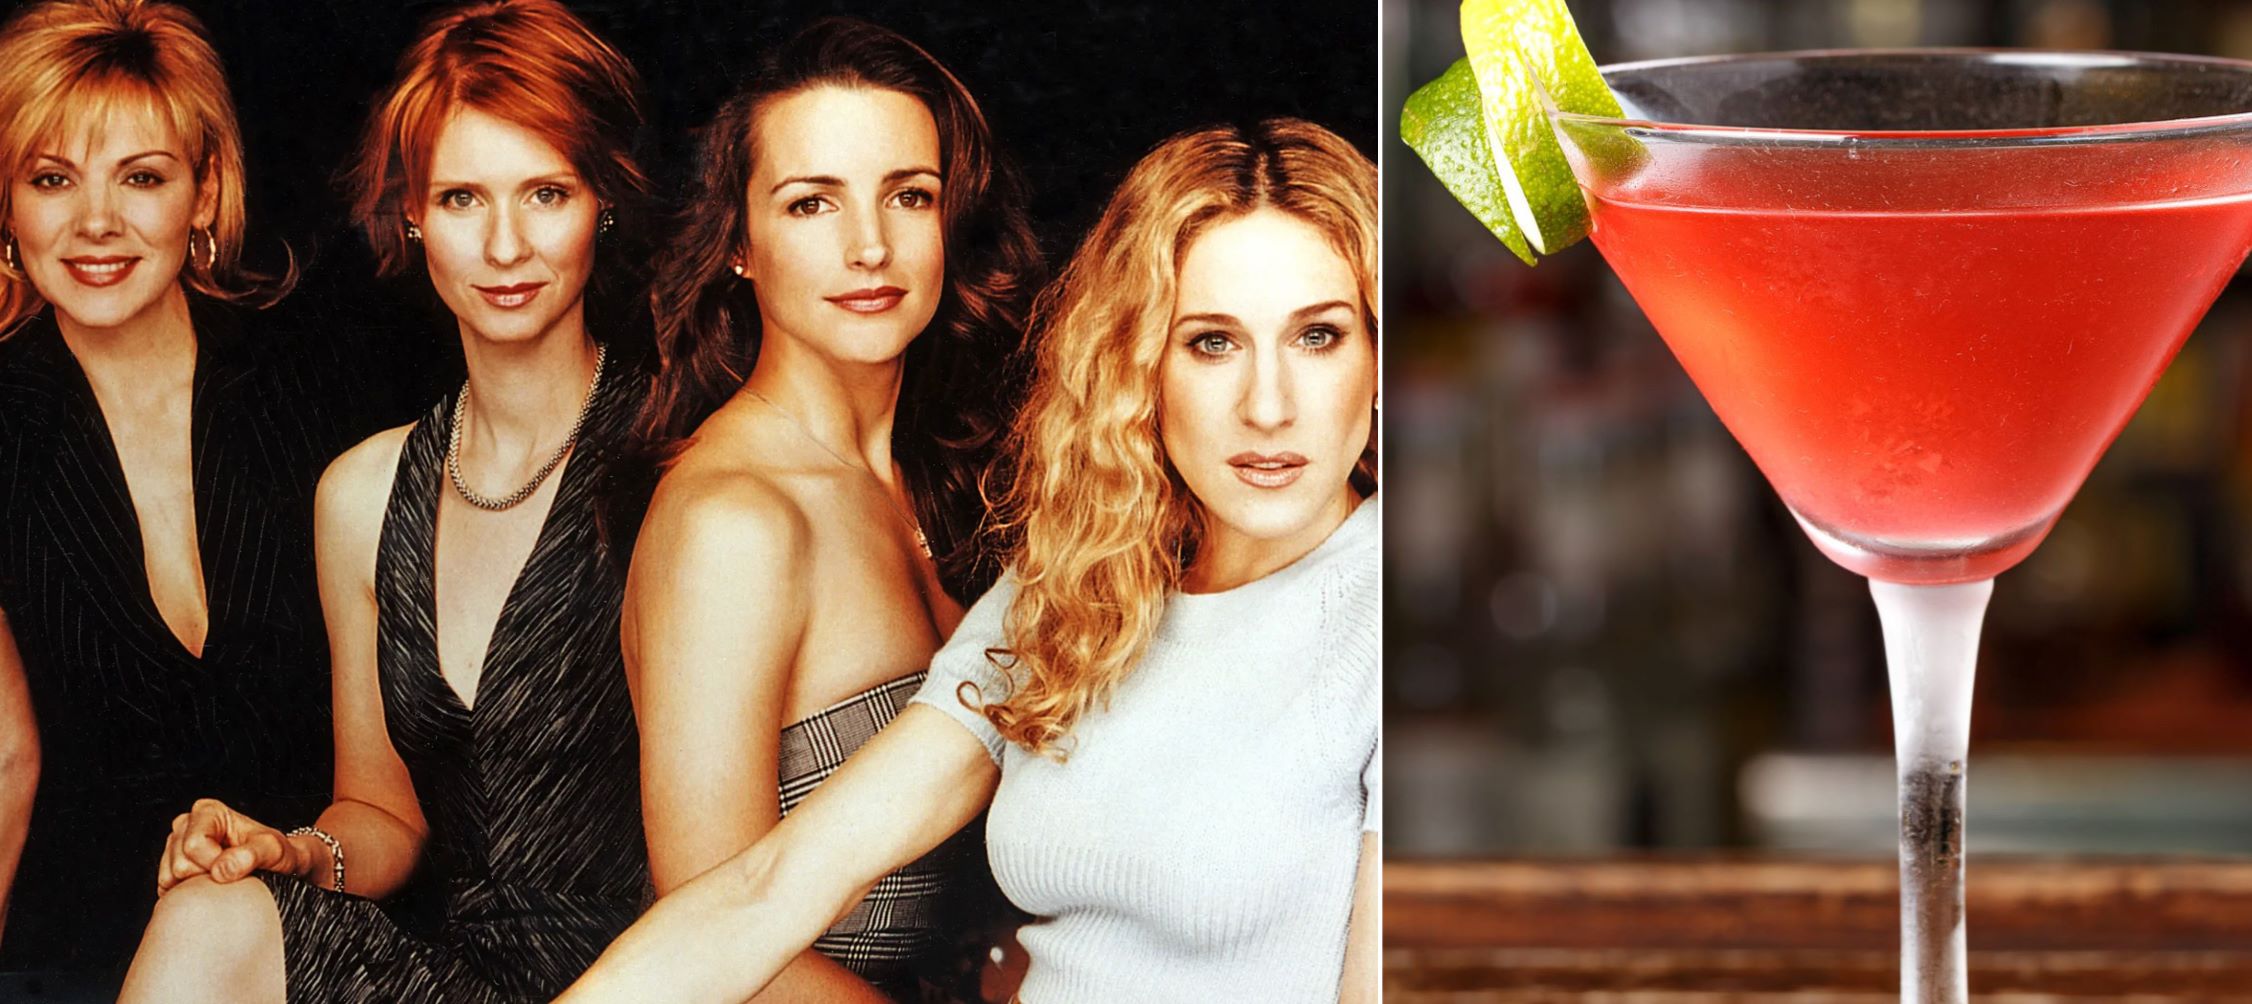 “Sex and the City”: 25 Years of Friendship, Sex, and Fabulousness!